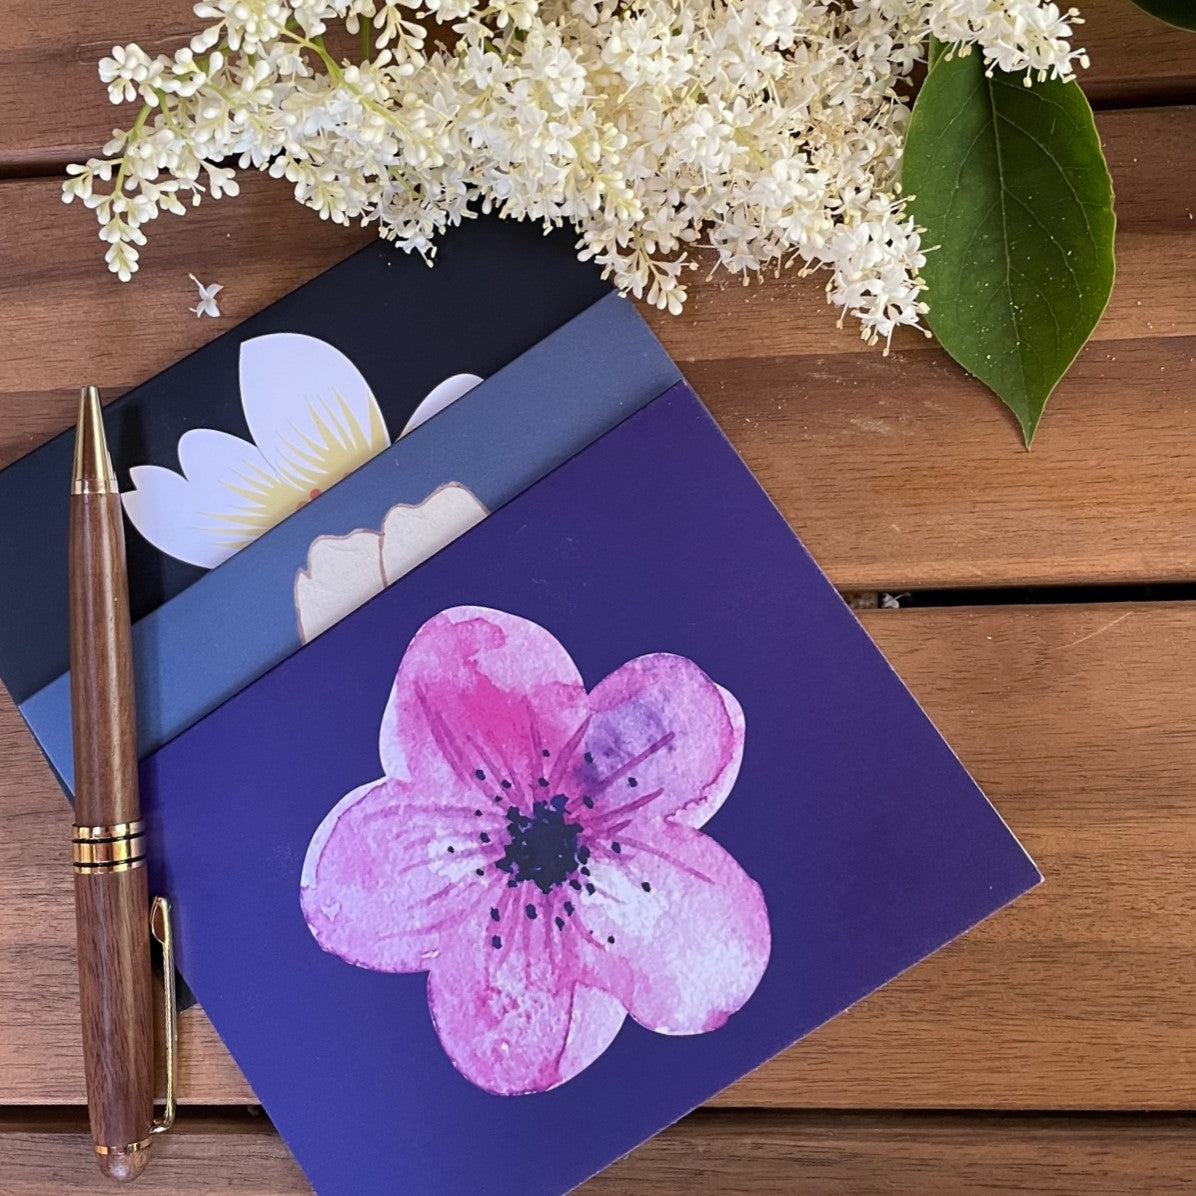 Hibiscus greeting and note cards, pack of six, black card with white graphic design flower, grey-blue card with yellow graphic design flower, navy blue card with graphic design flower, three postcards and brown pen laying on a wood background with a white flower.